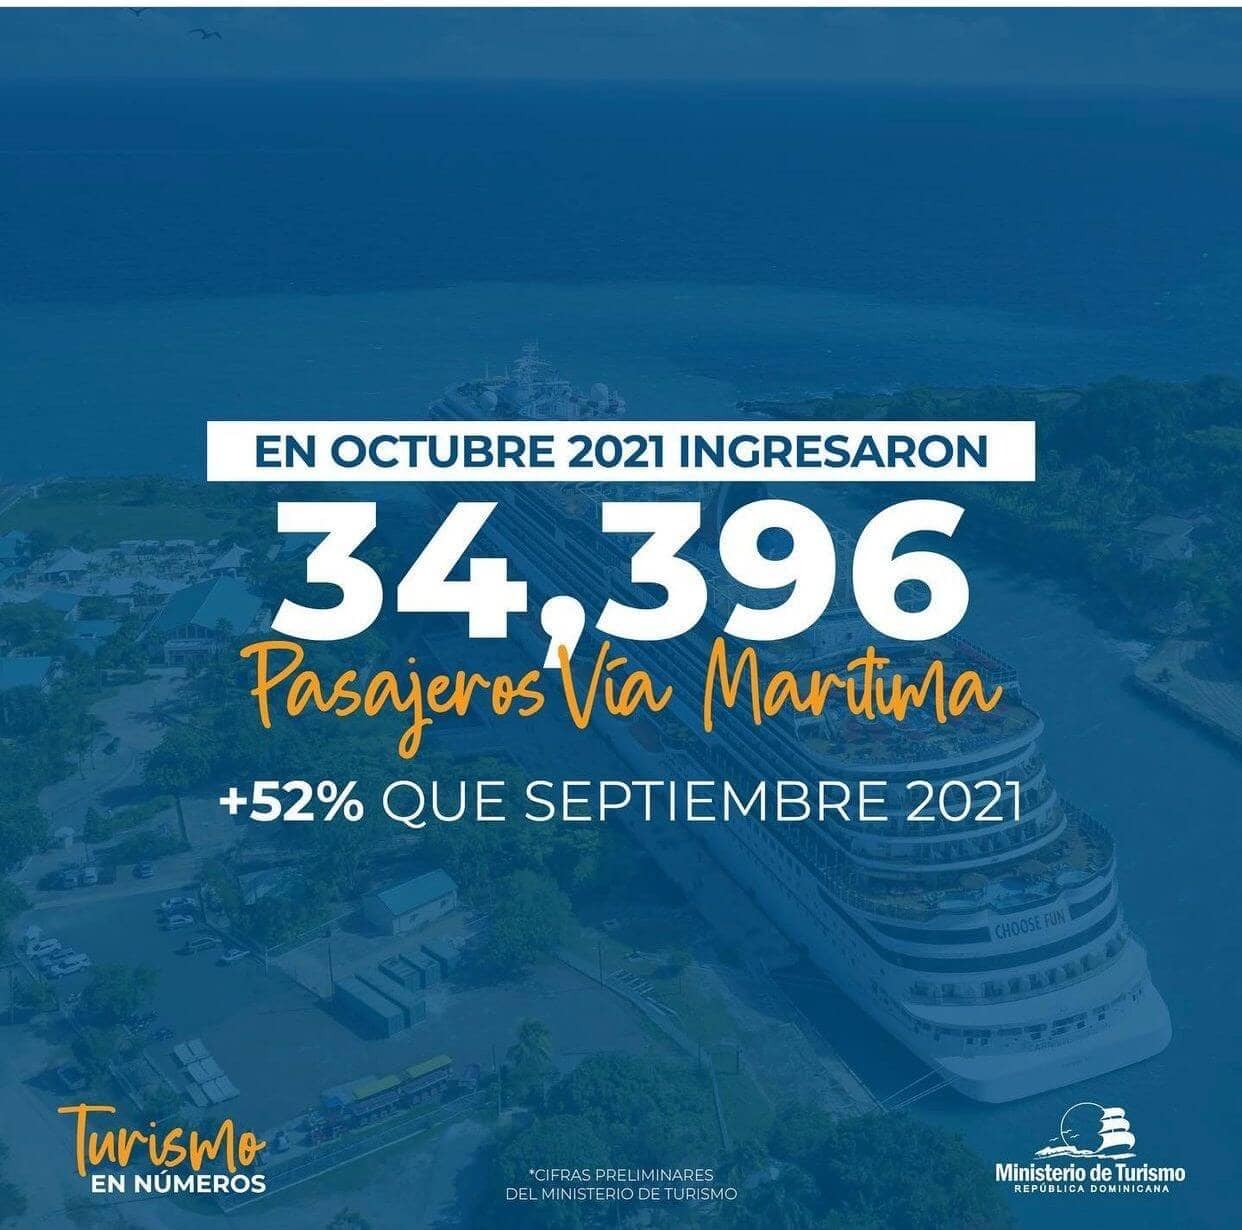 In October 2021 passengers by sea